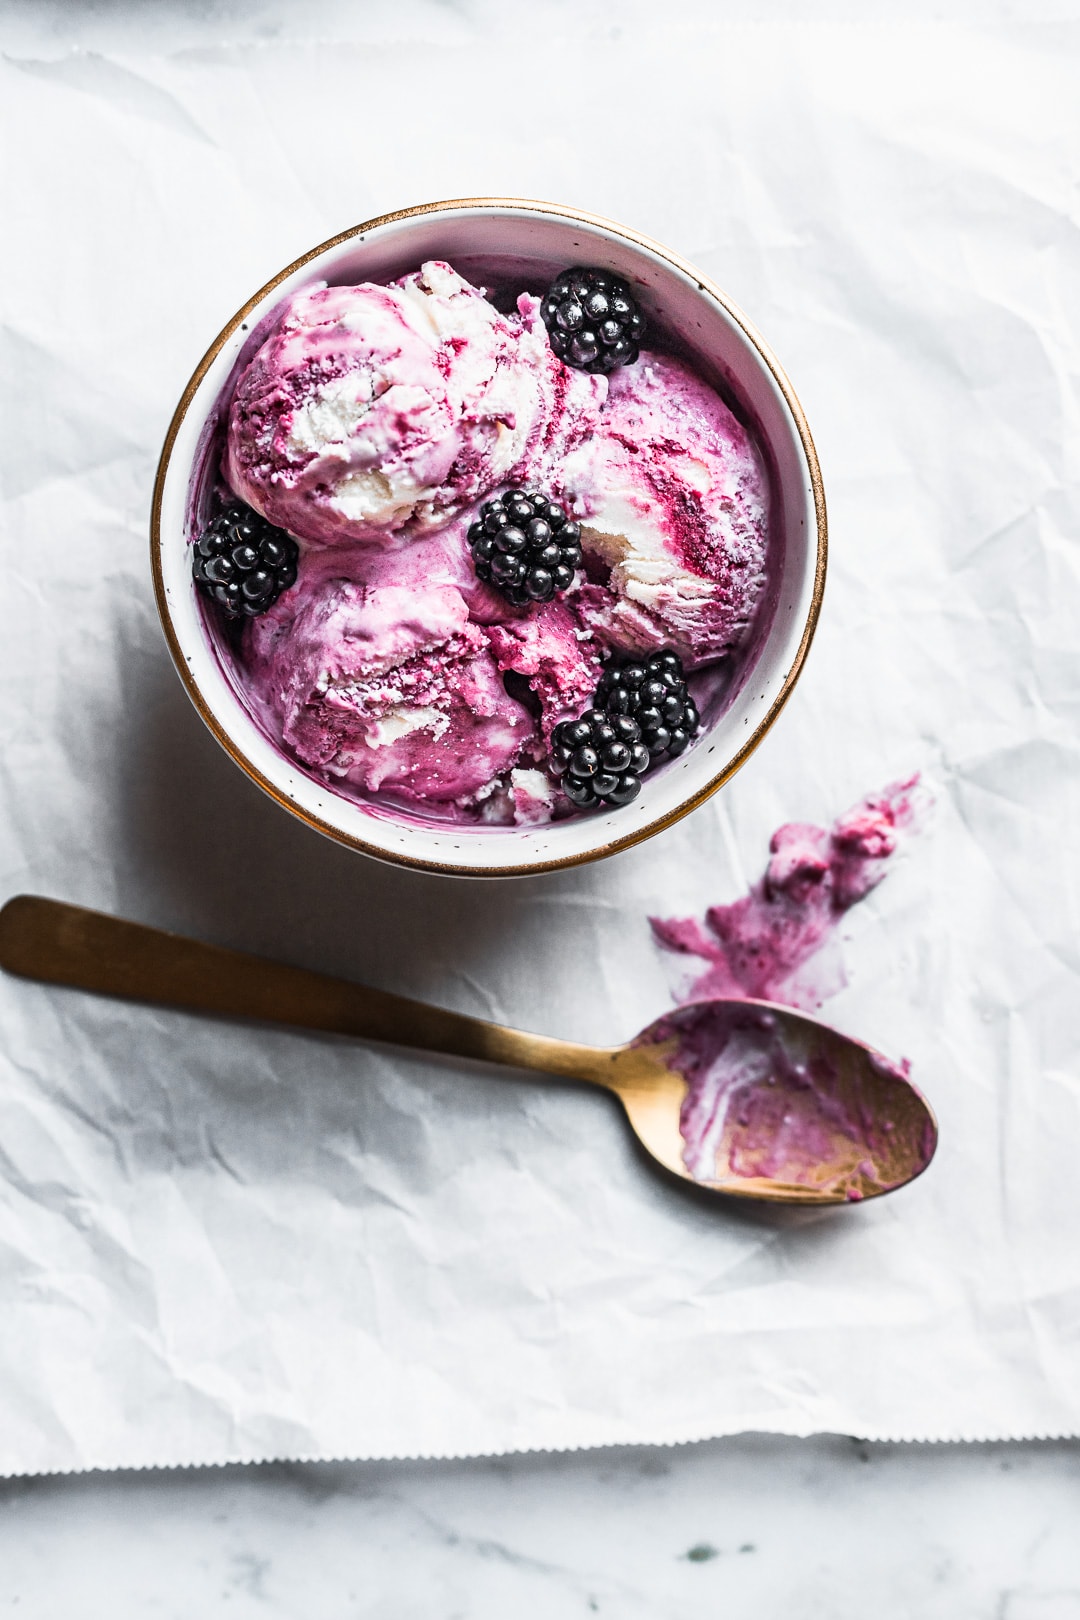 Bowl of honey blackberry mascarpone ice cream scoops with blackberries on top and gold spoon nearby